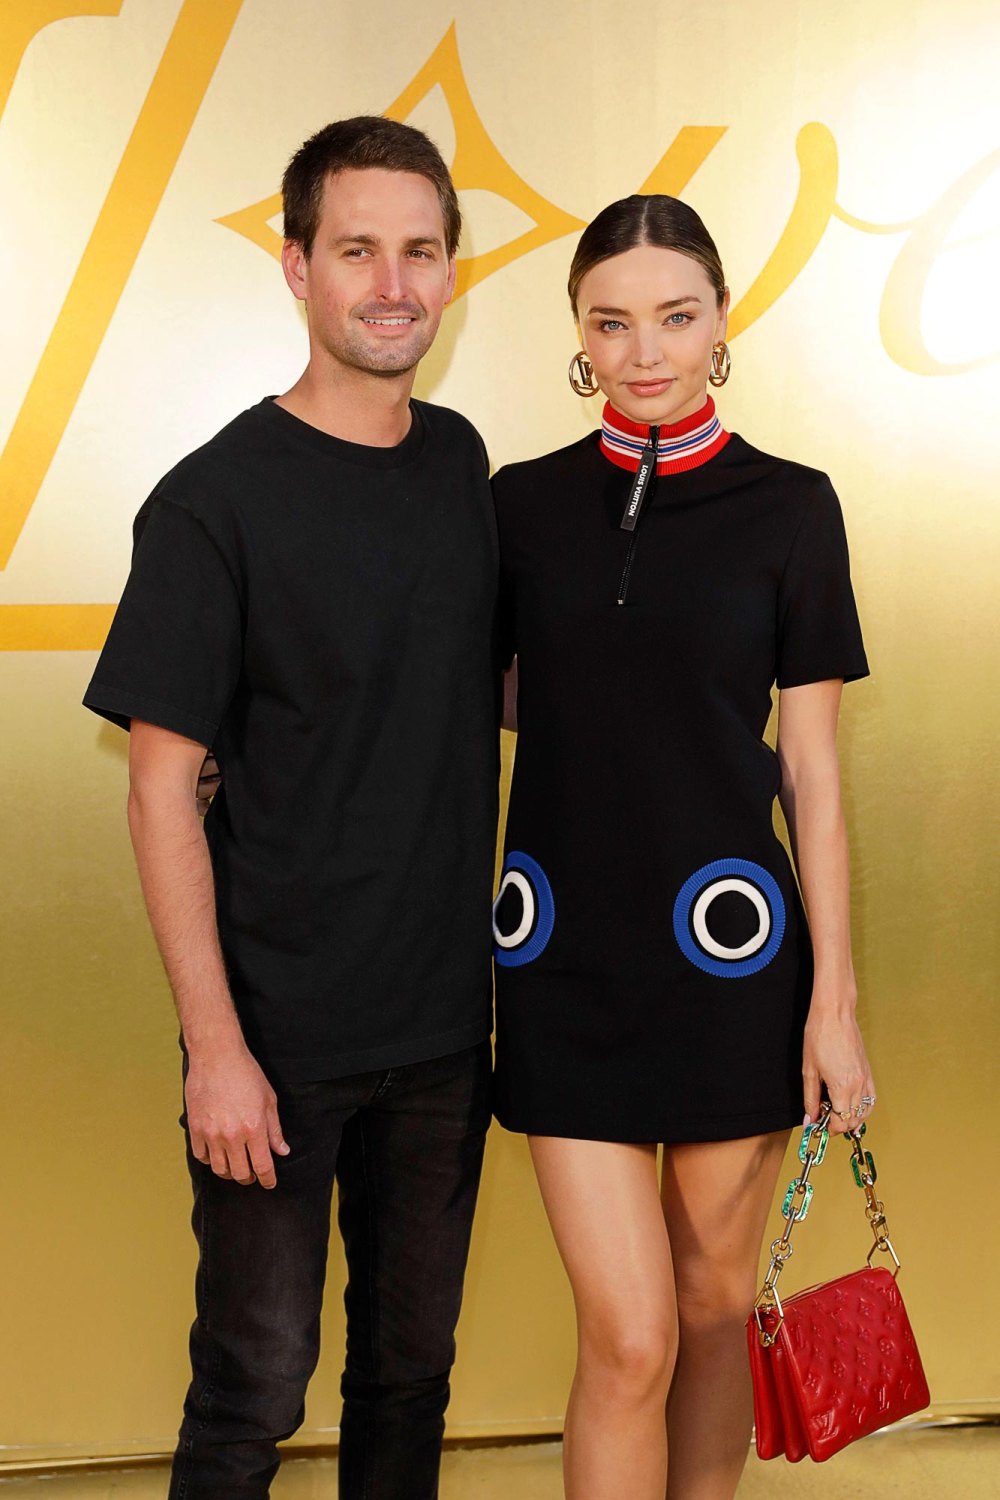 Miranda Kerr Is Pregnant Expecting Baby No. 4 Her 3rd With Husband Evan Spiegel So Excited 428